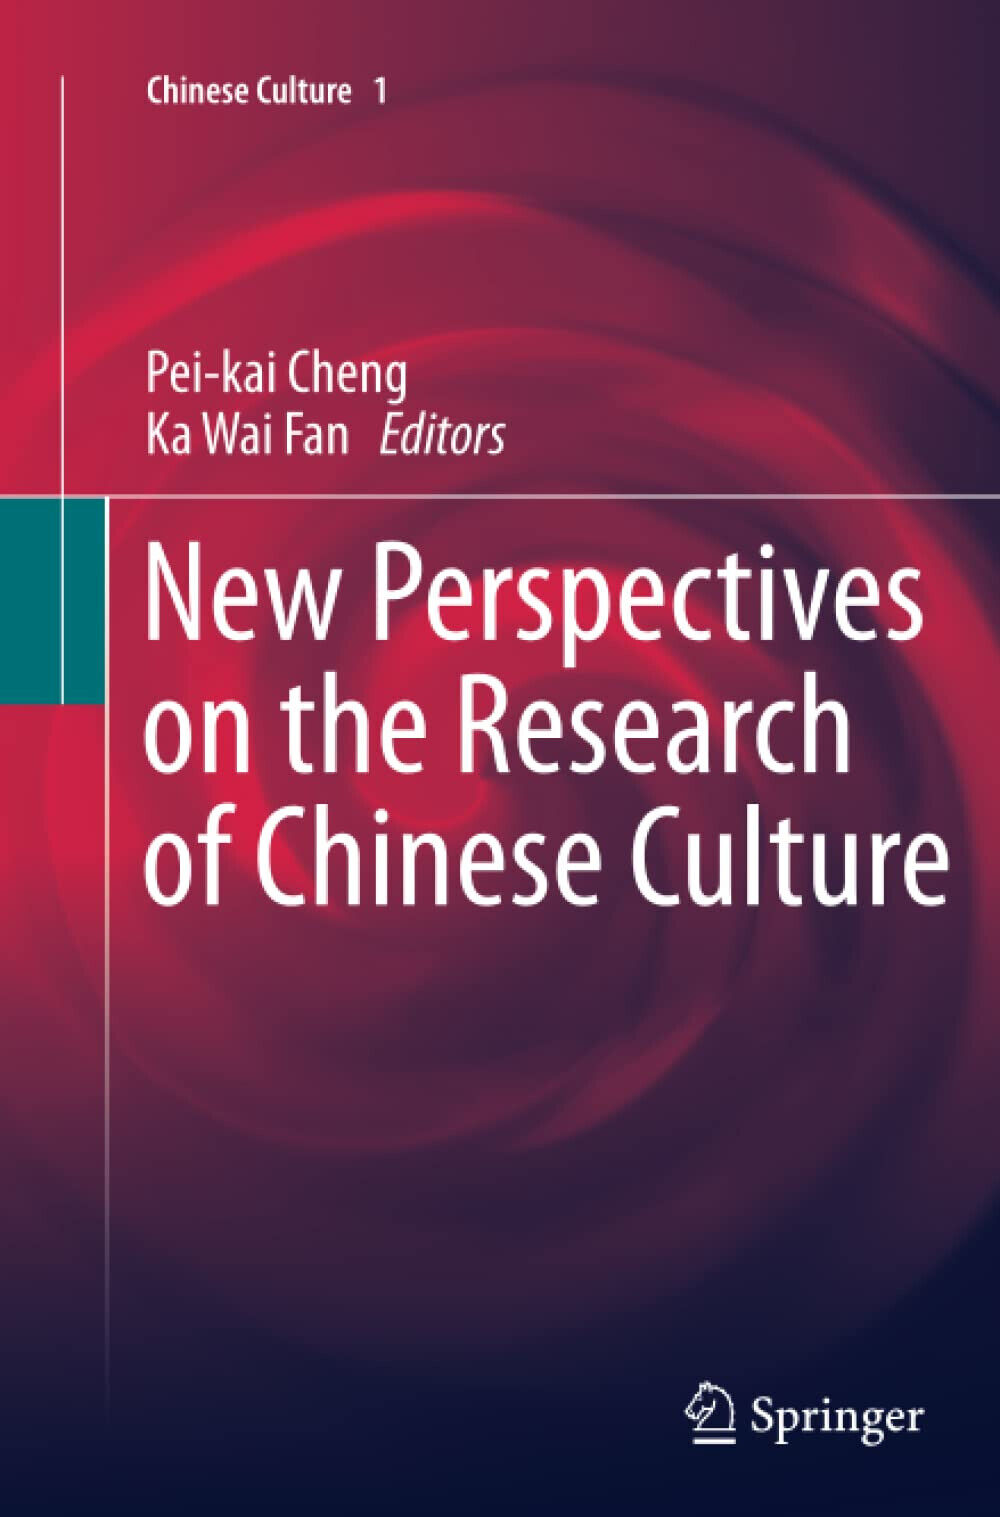 New Perspectives on the Research of Chinese Culture - Pei-kai Cheng - 2015 libro usato